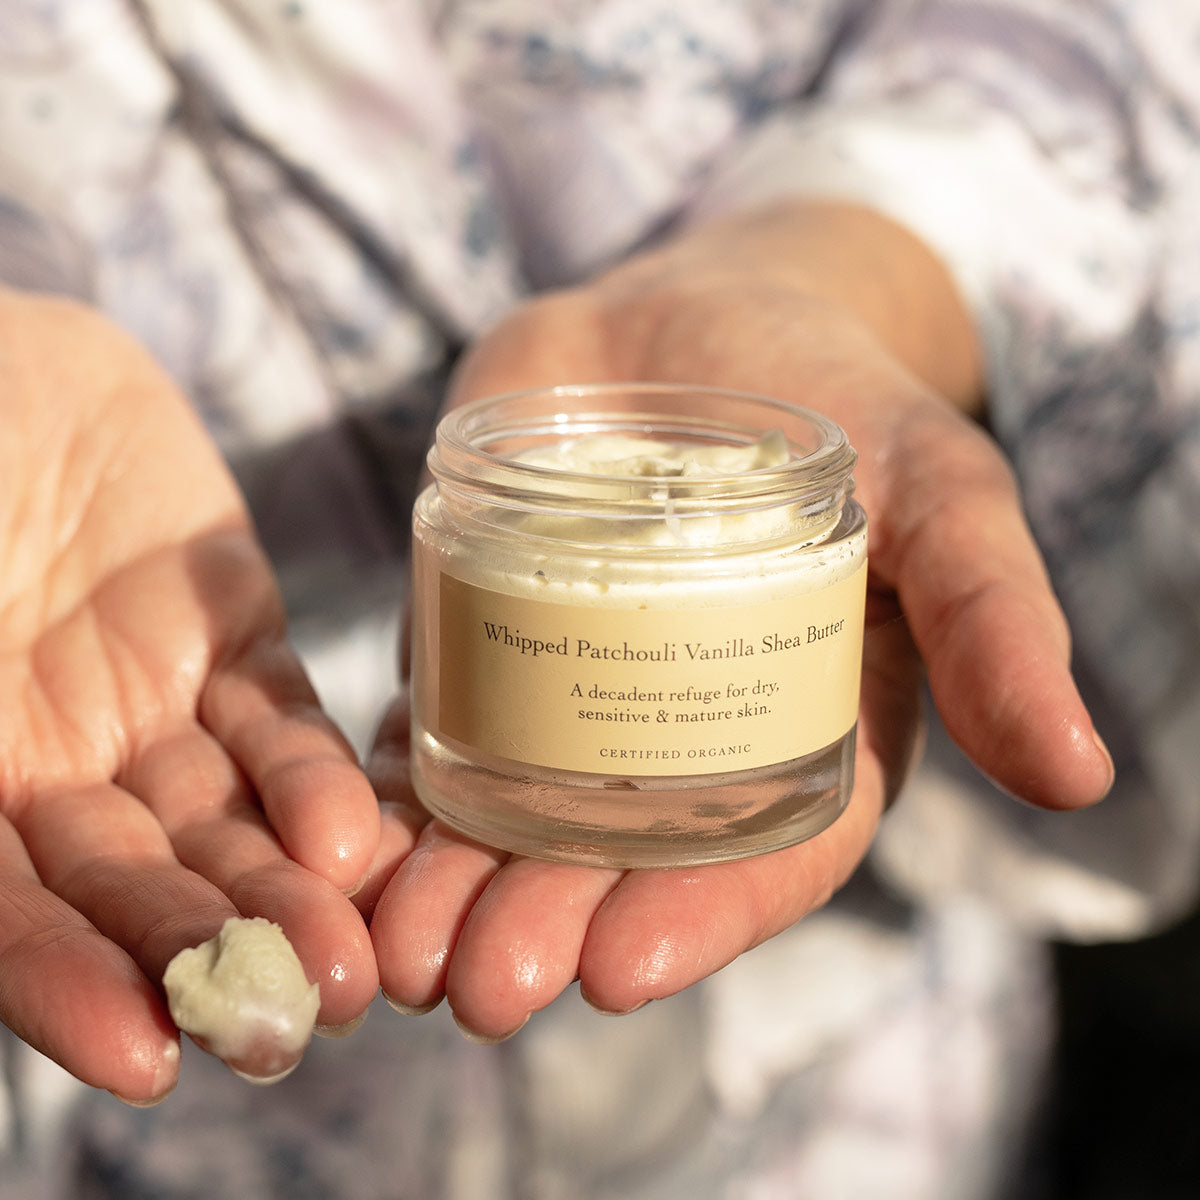 model with whipped patchouli vanilla shea butter on finger showing texture of moisturizer